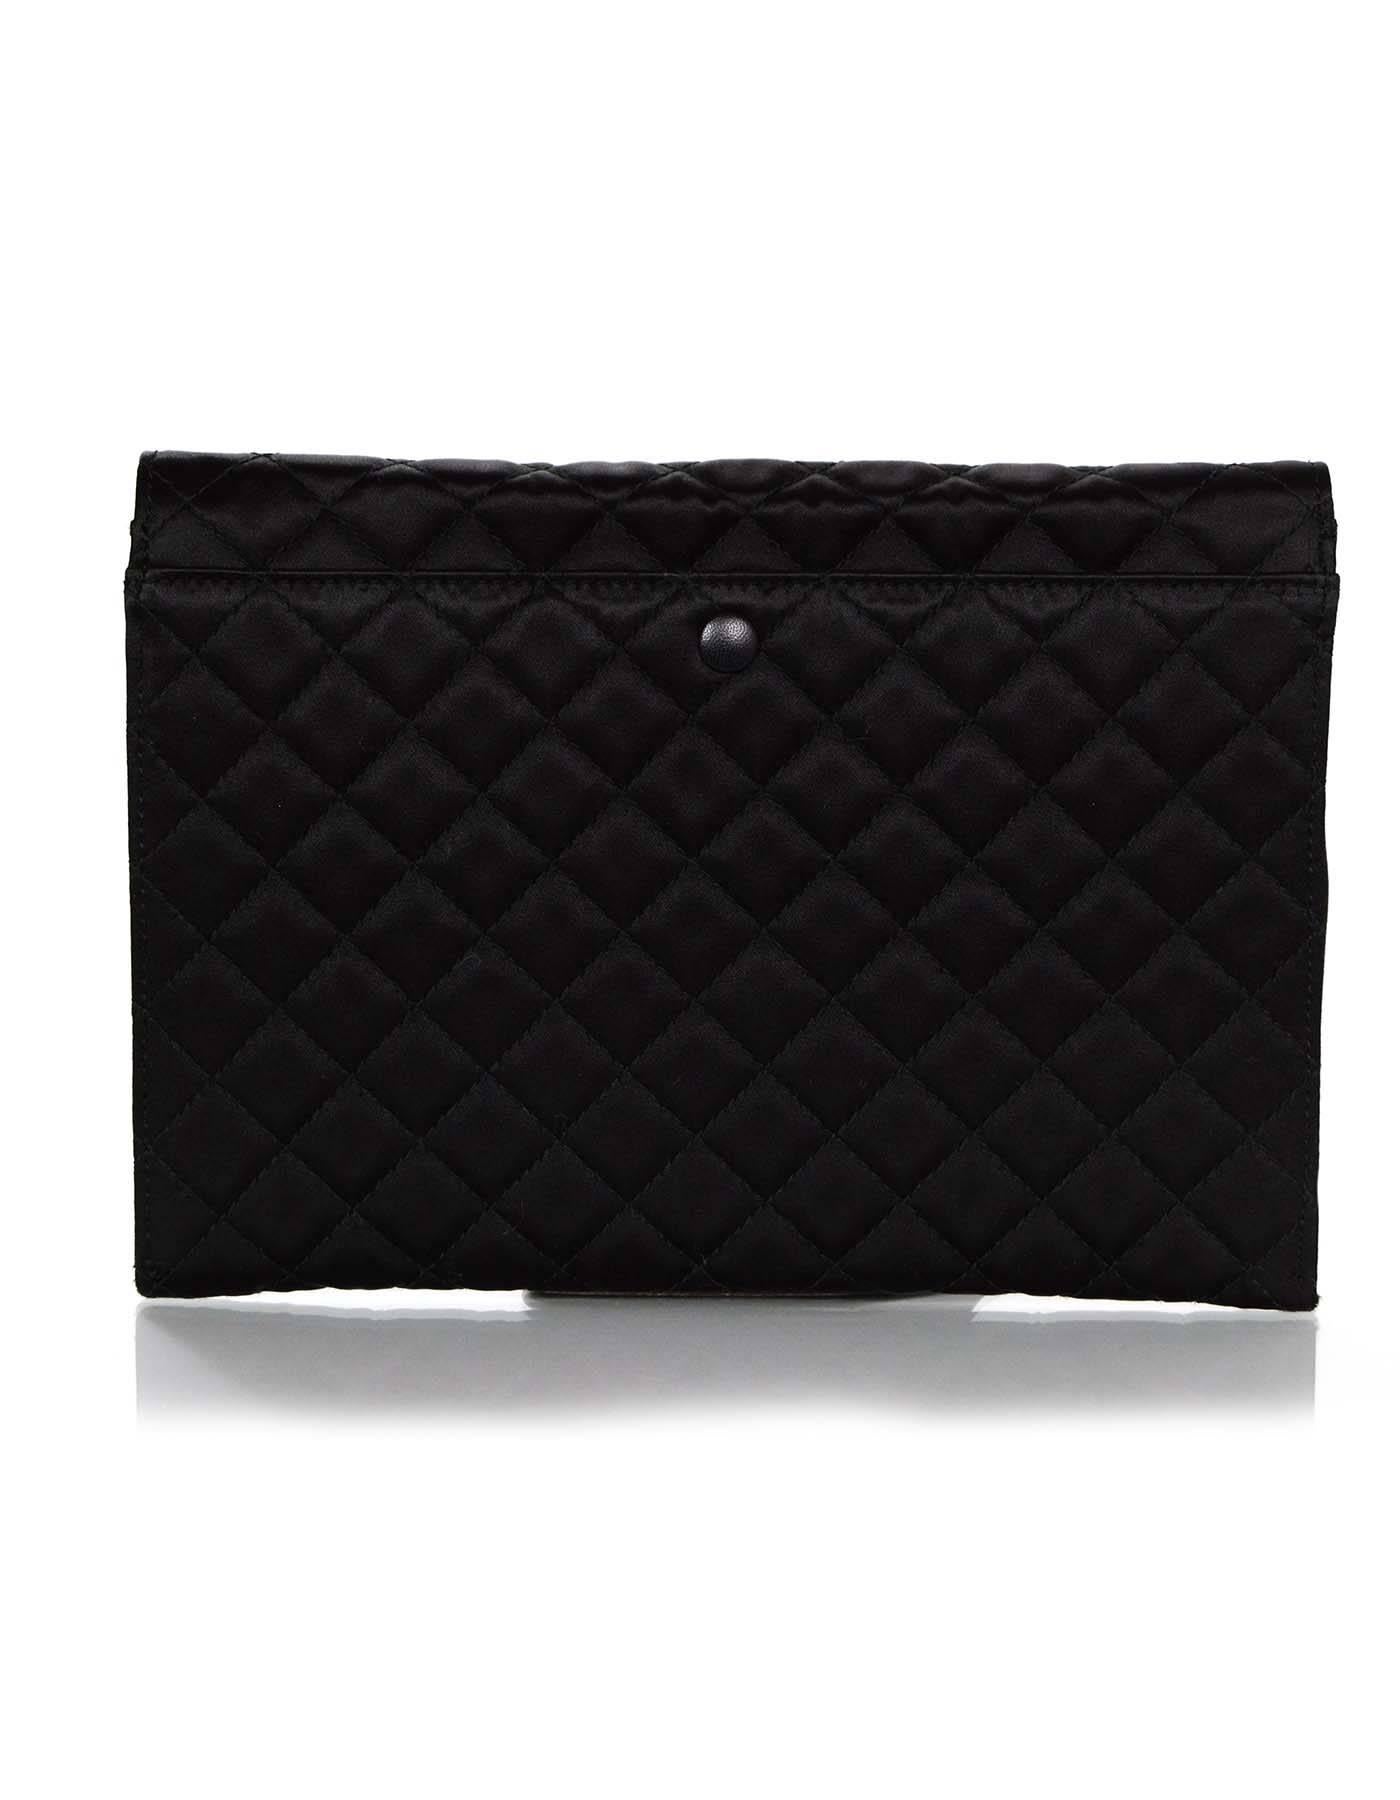 Jil Sander Black Quilted Satin Clutch Bag  In Excellent Condition In New York, NY